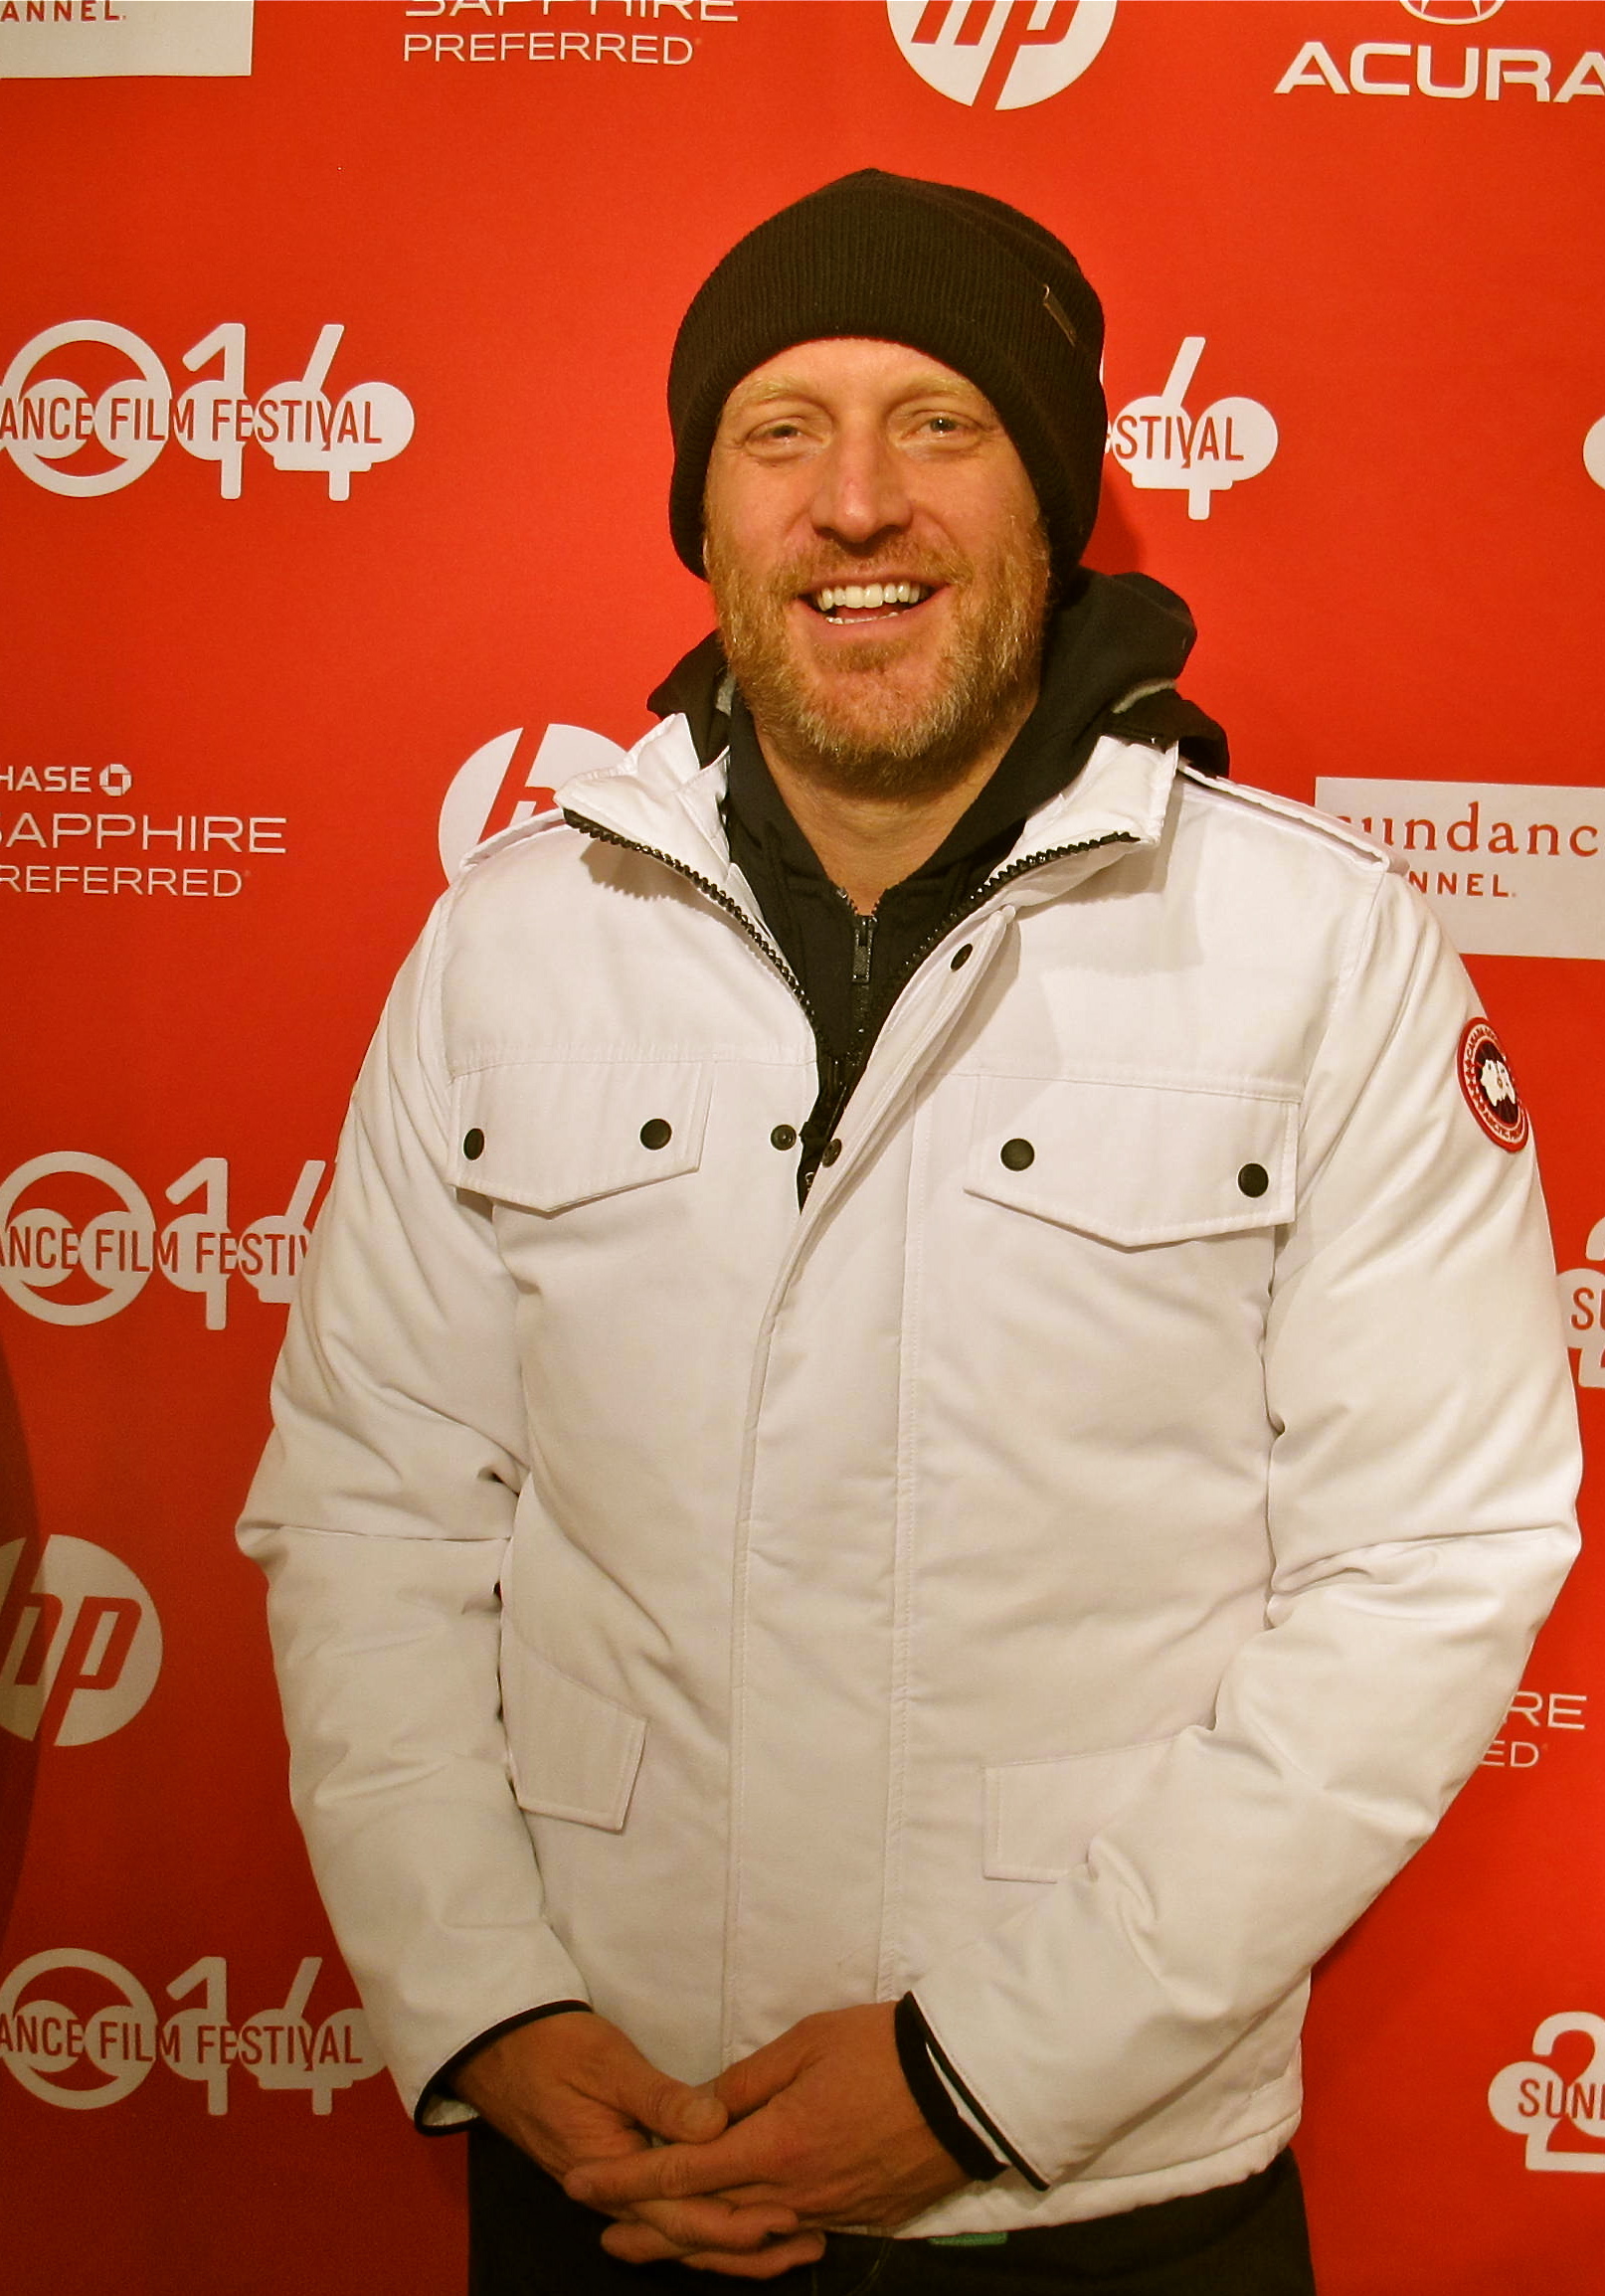 At an event during the Sundance Film Festival 2014.